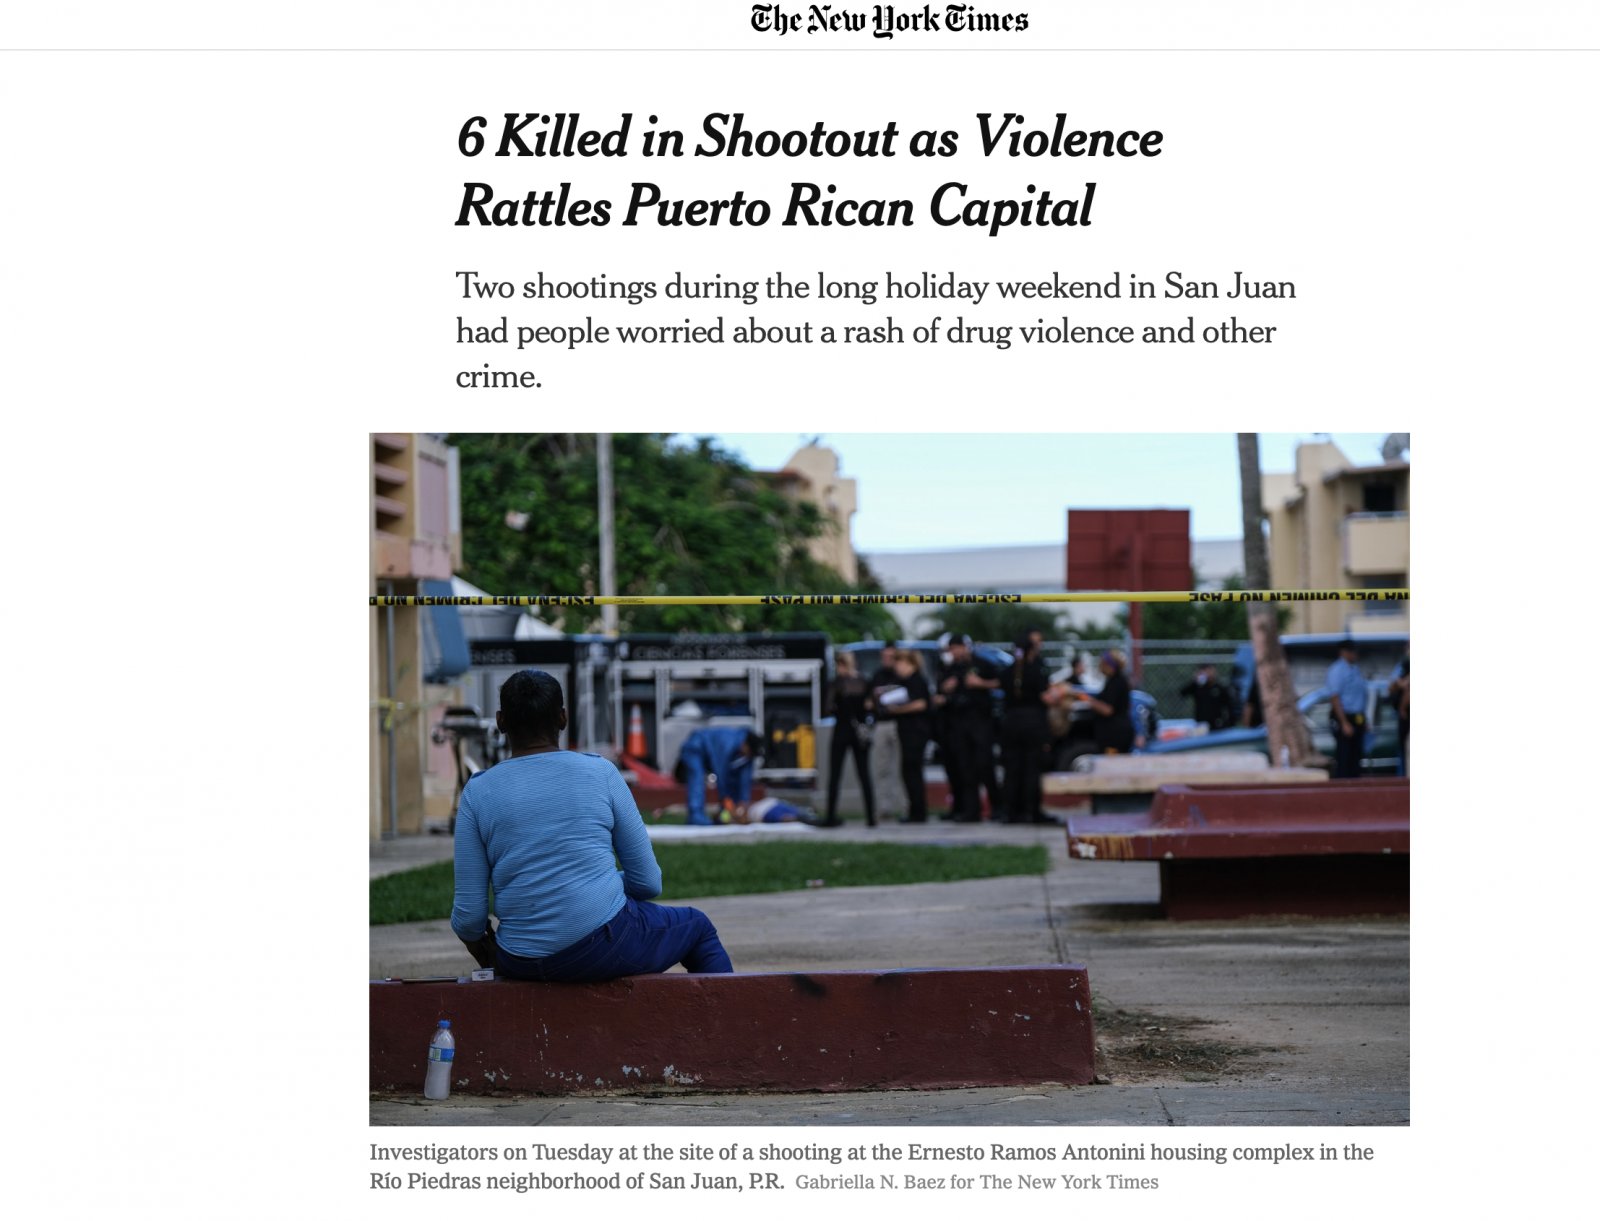 Latest NYT Assignment: "6 Killed in Shootout as Violence Rattles Puerto Rican Capital"